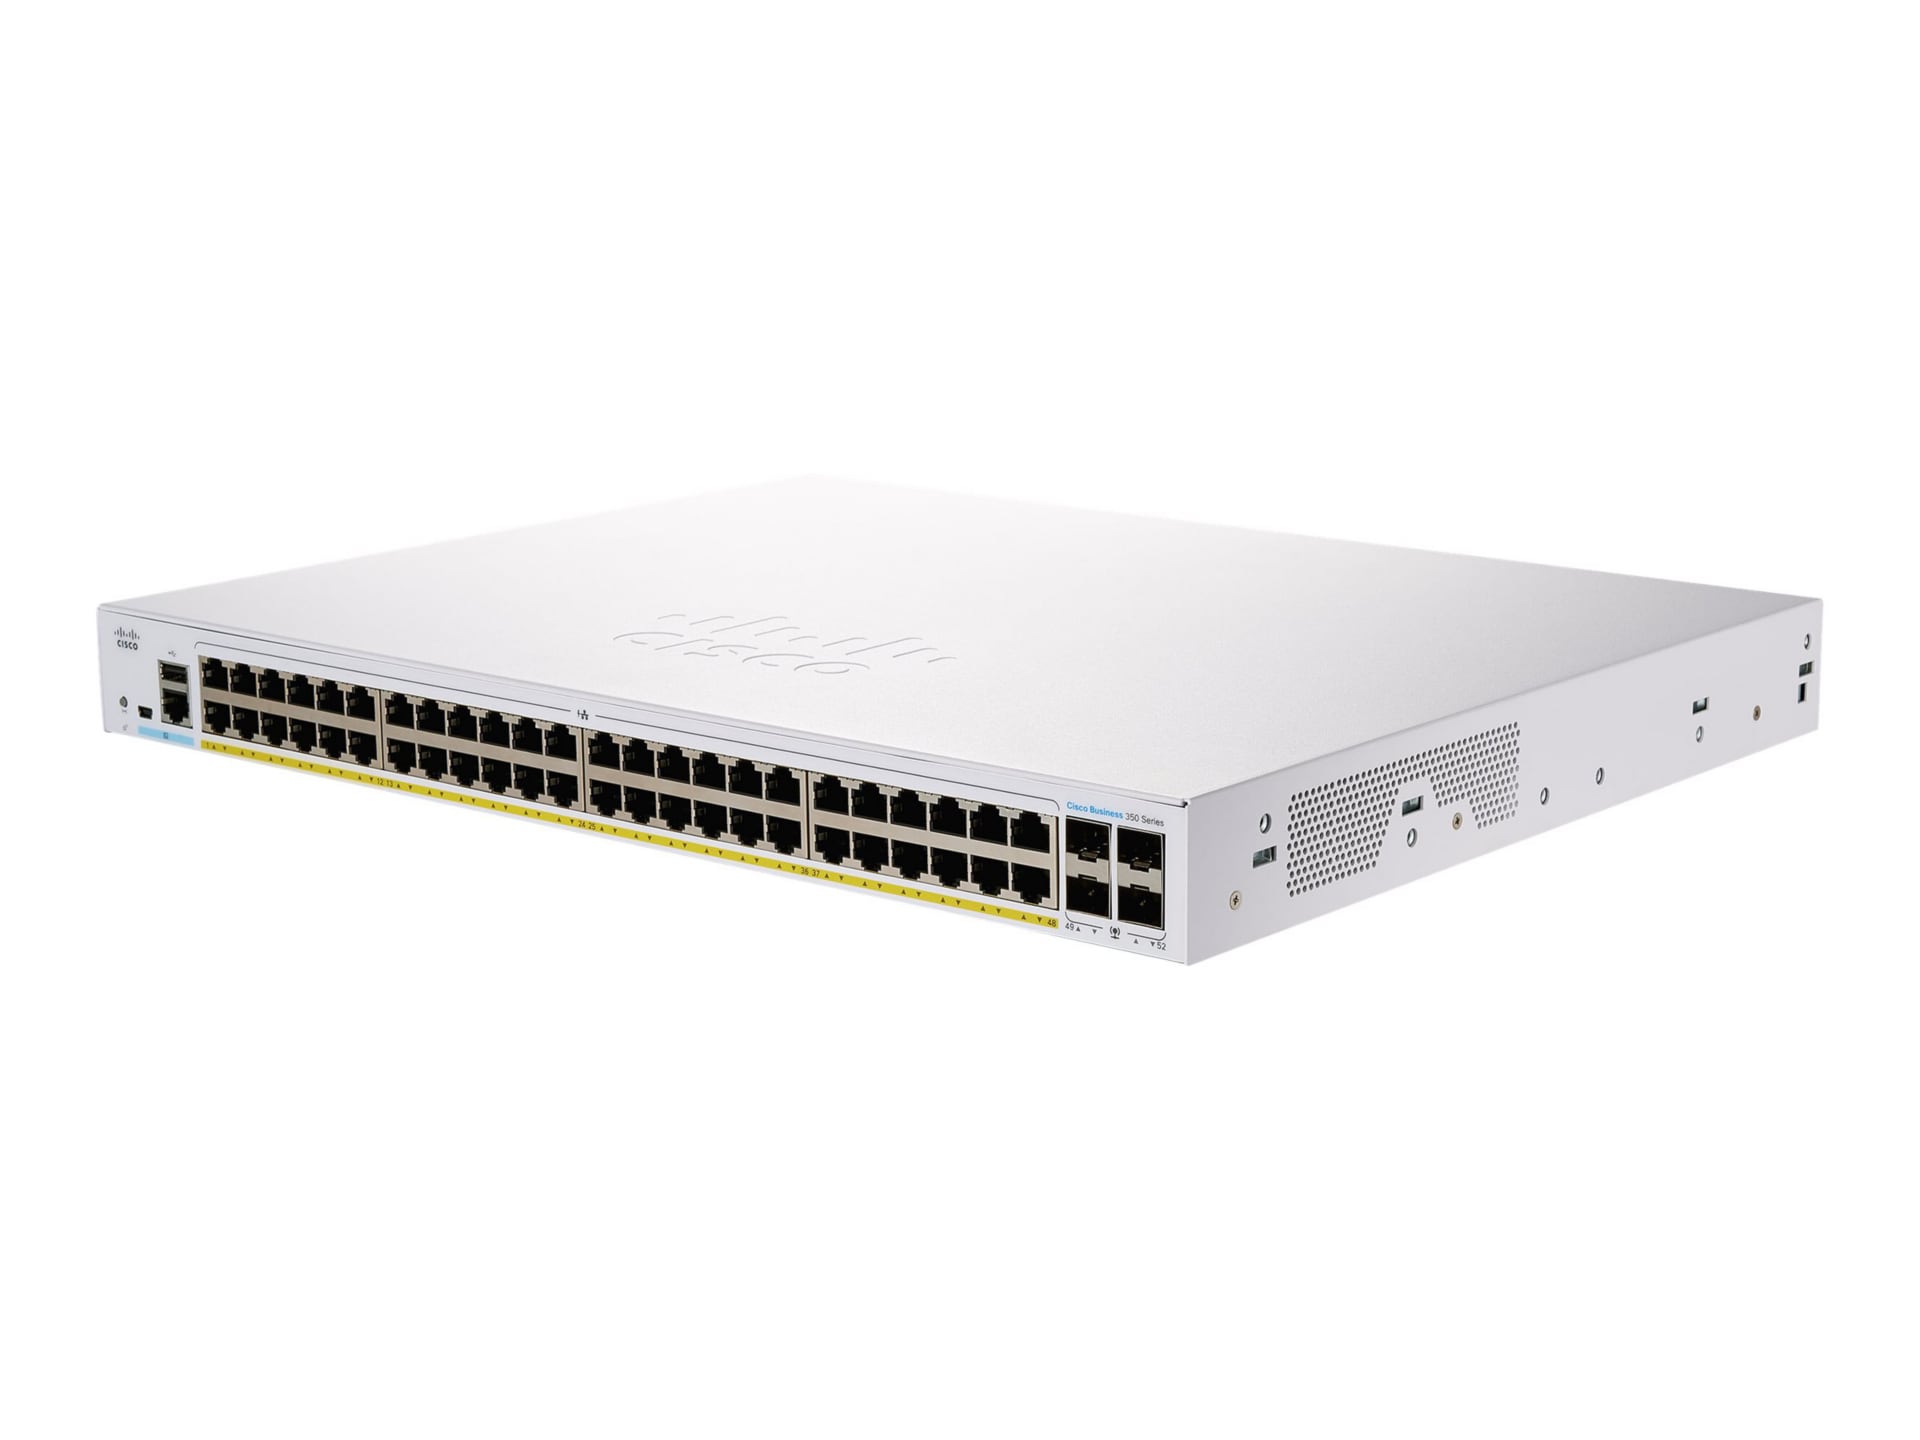 Cisco Business 350 Series 350-48P-4G - switch - 48 ports - managed - rack-mountable